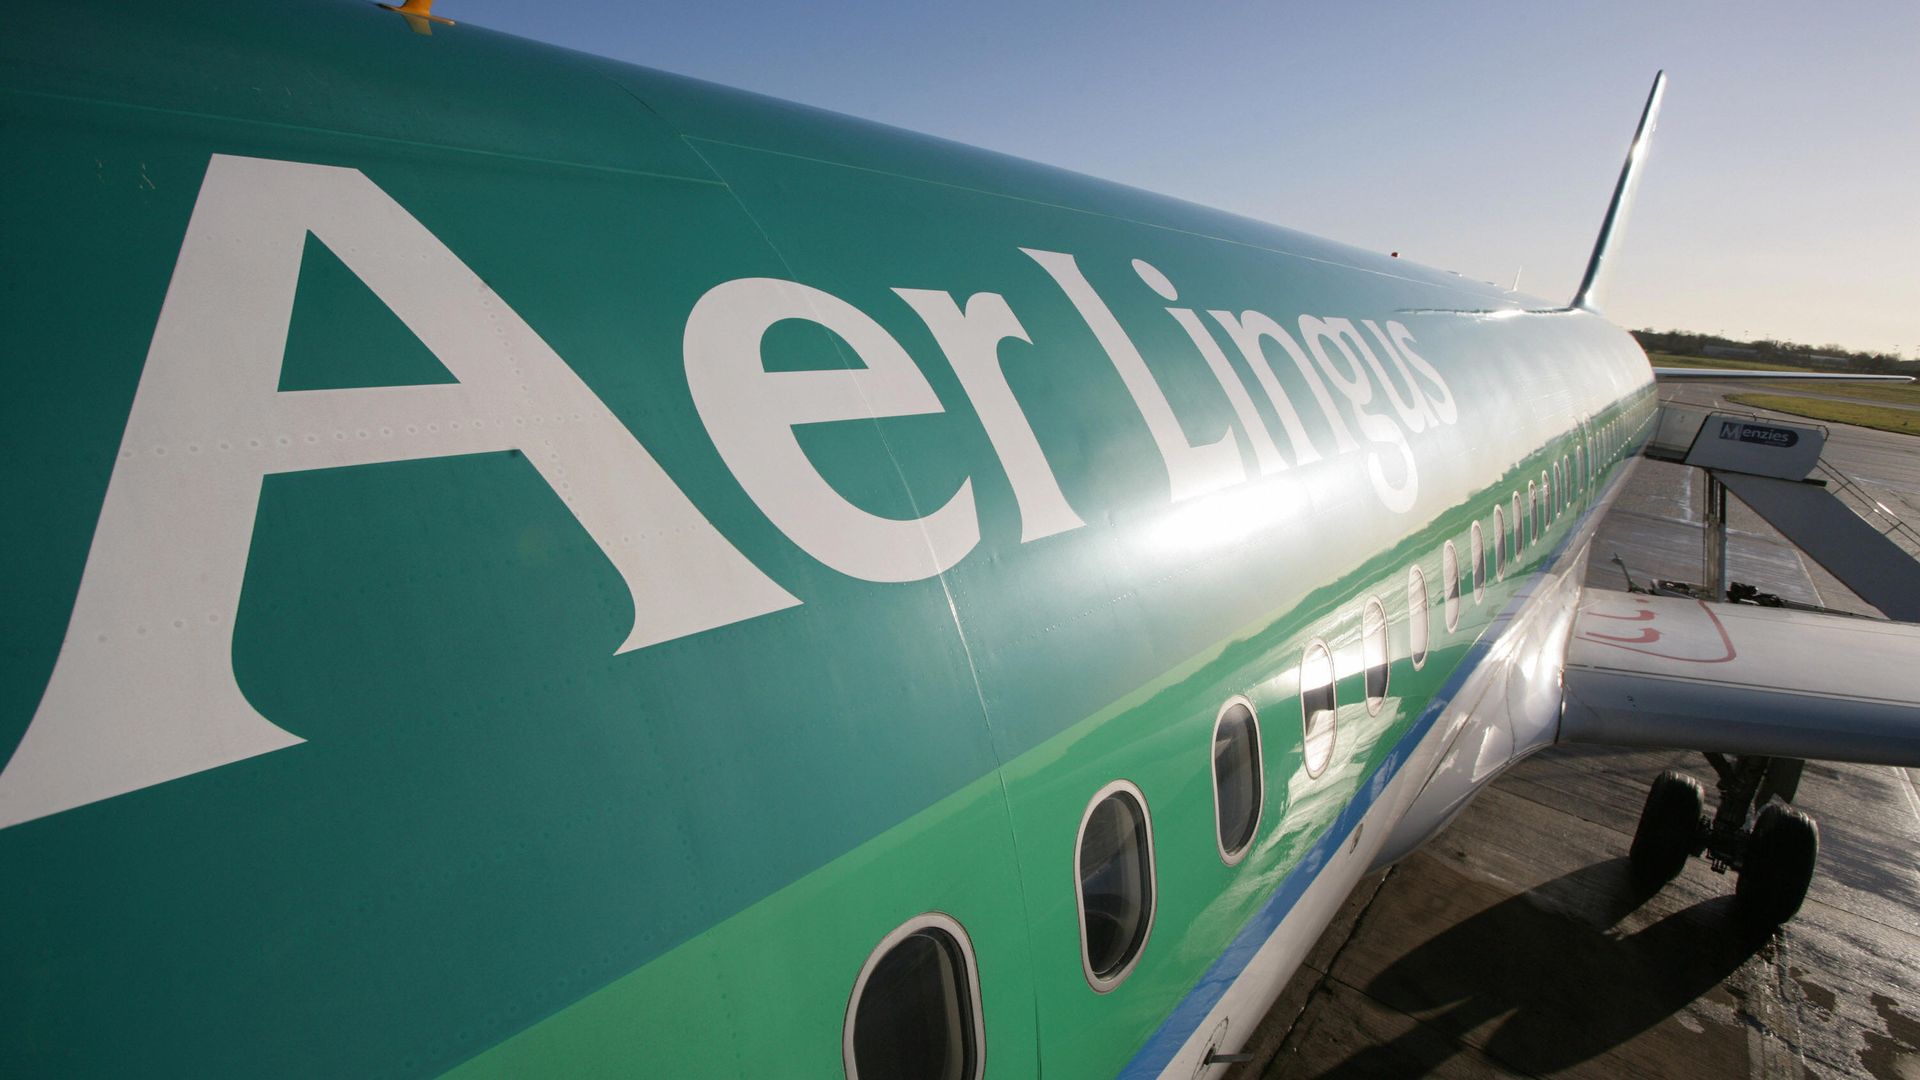 An Aer Lingus jet, looking very green